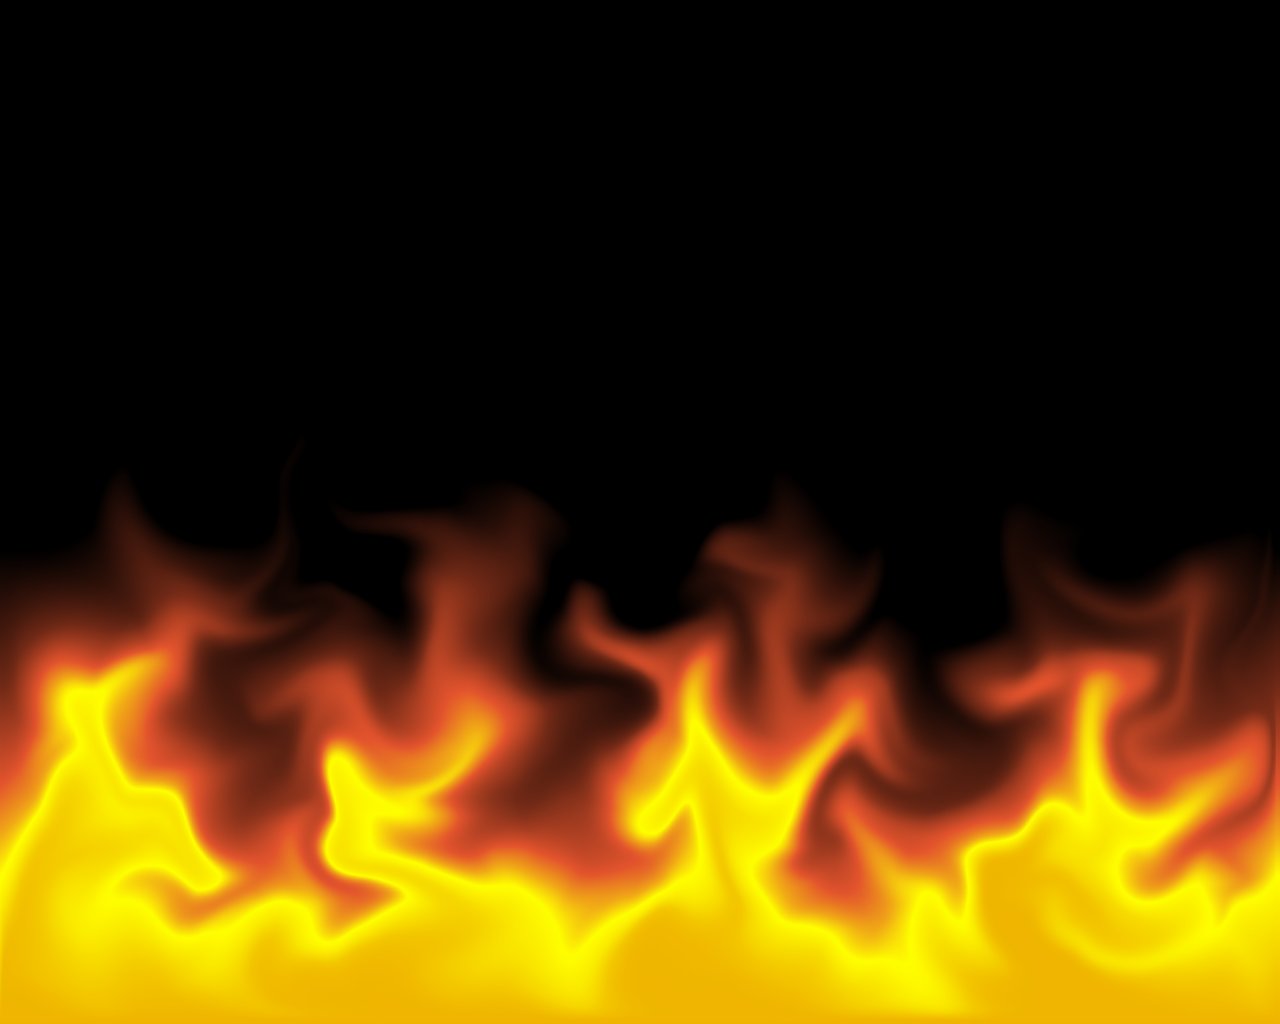 Cartoon Fire With Black Background - 1280x1024 Wallpaper 